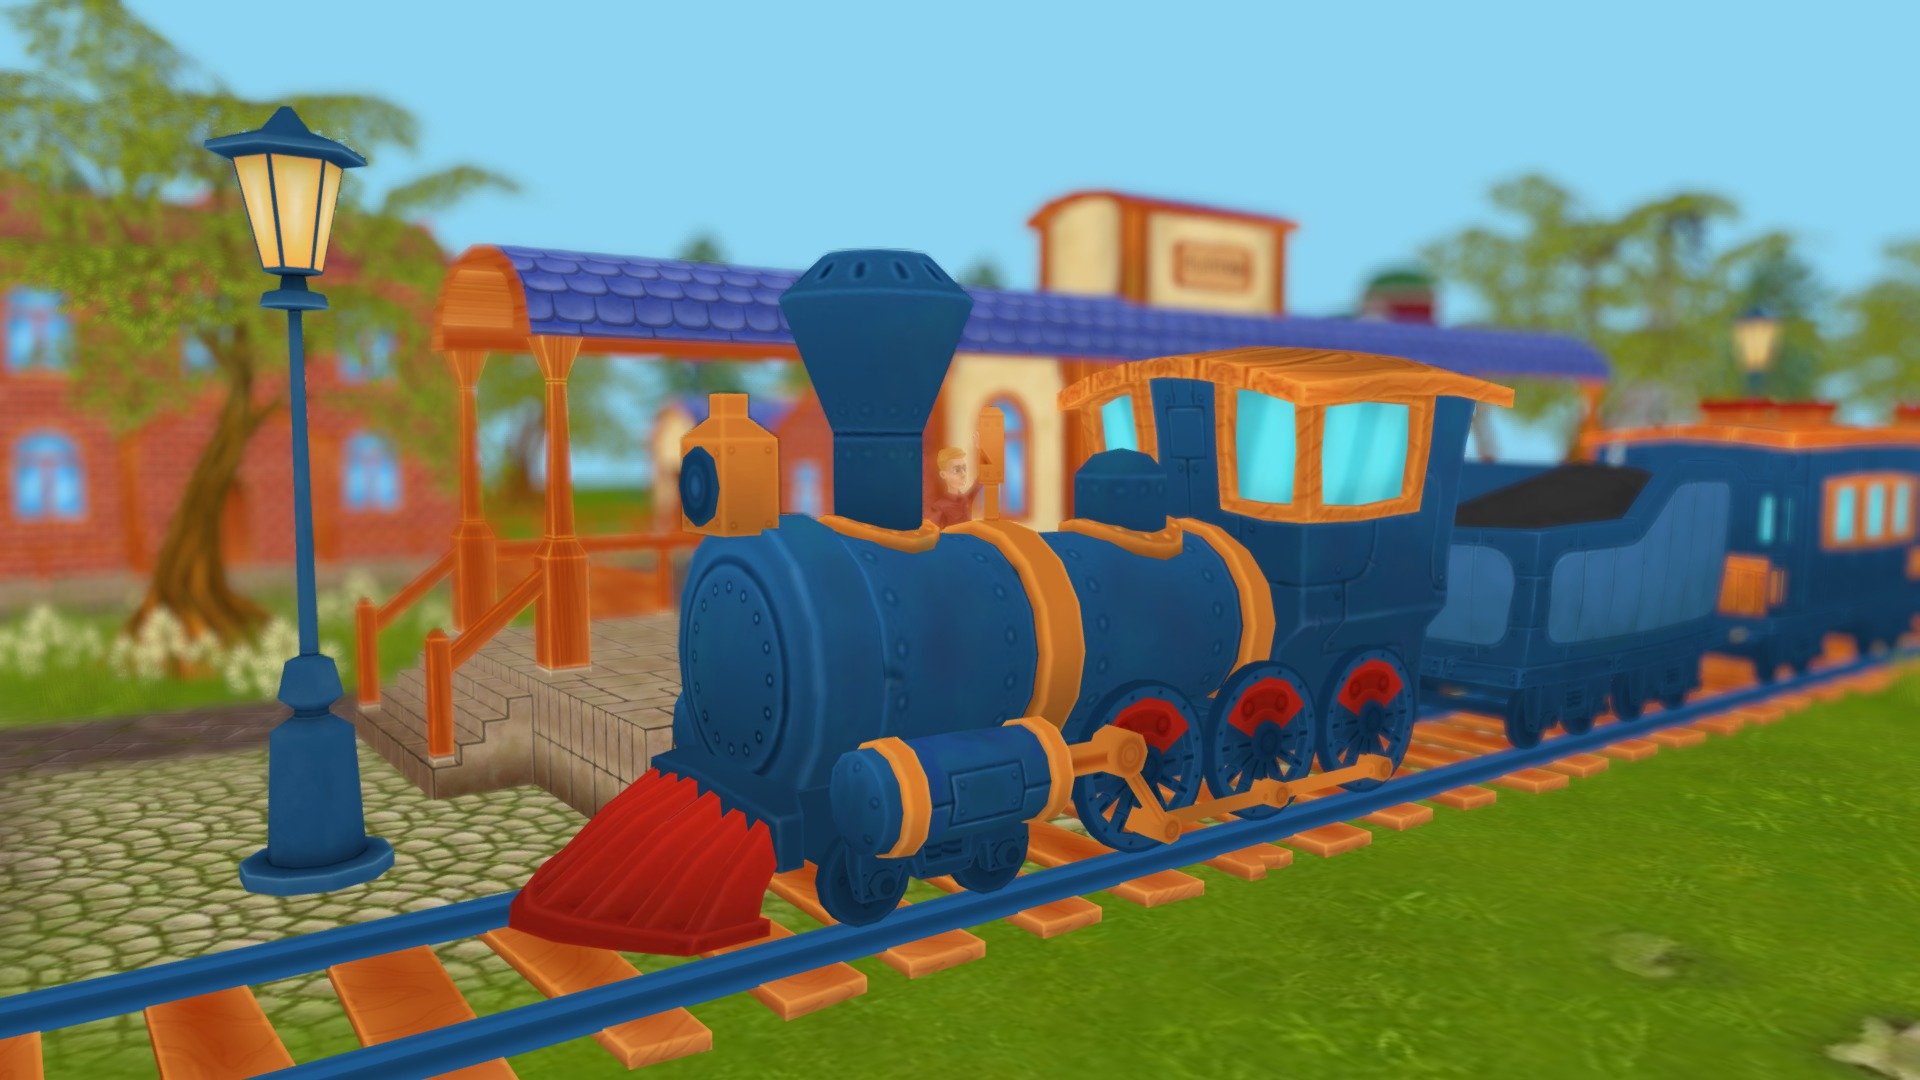 A cartoon train locomotive with wagons and rails, version 1.2.

https://www.youtube.com/watch?v=T-wFInOIsMY

https://www.youtube.com/watch?v=nJsxVSIhphg&amp;t=236s

https://www.youtube.com/watch?v=P2n0PHHWPdg&amp;t=15s

Locomotive, coal, passenger, cargo, platform, - 2 skins. All cars contain 3 animations - idle, run, run cartoon. 3 types of windows - transparent, not transparent, without glass. 2 types of railway, normal and with forms. A fork on the left, a fork on the right, an intersection. 5 buildings and platform, fence, bench. Semaphore, lamp, speaker, column, barrier, types of dead end. 6 ground textures, 2 grass texture. Model tree, spruce. Exhaust smoke. Model farm-hangar, farm-storage, farm-pump, farm-stairs, farm_fence, farm_fence_goal, tent. Character: Man - rig Humanoid 3d model